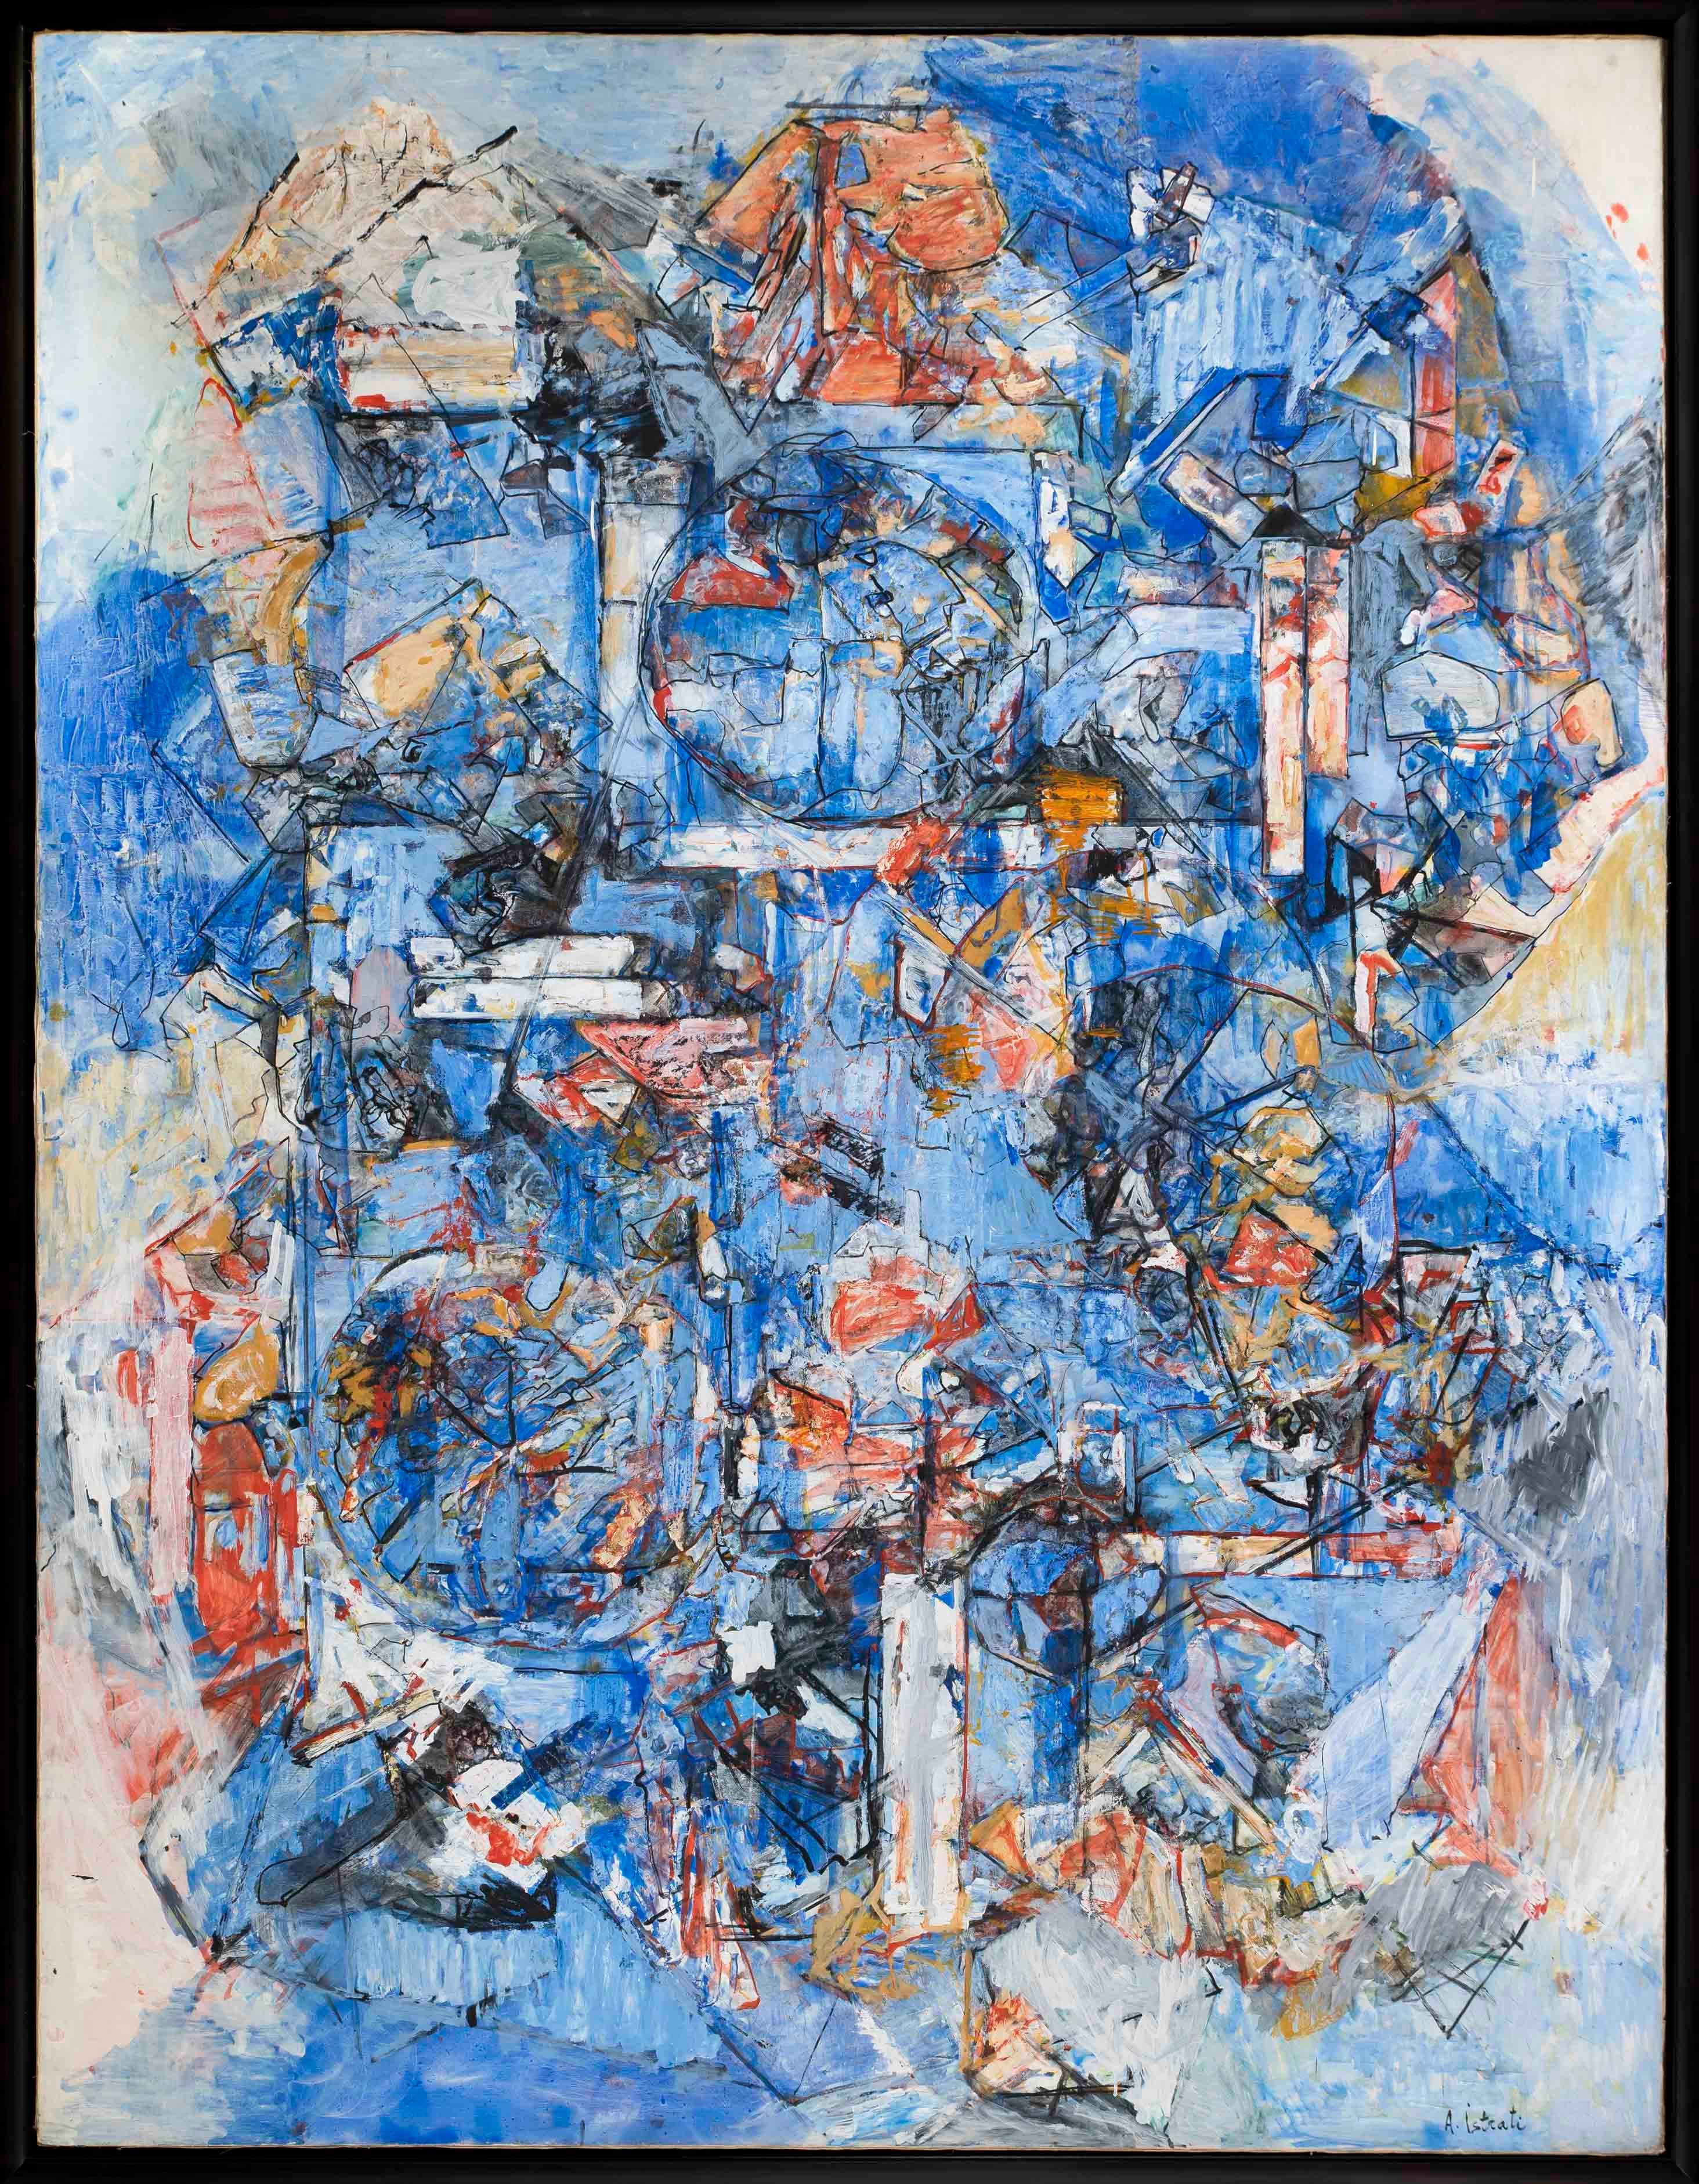 Sans titre, 1984-1987 - Painting by Alexandre Istrati